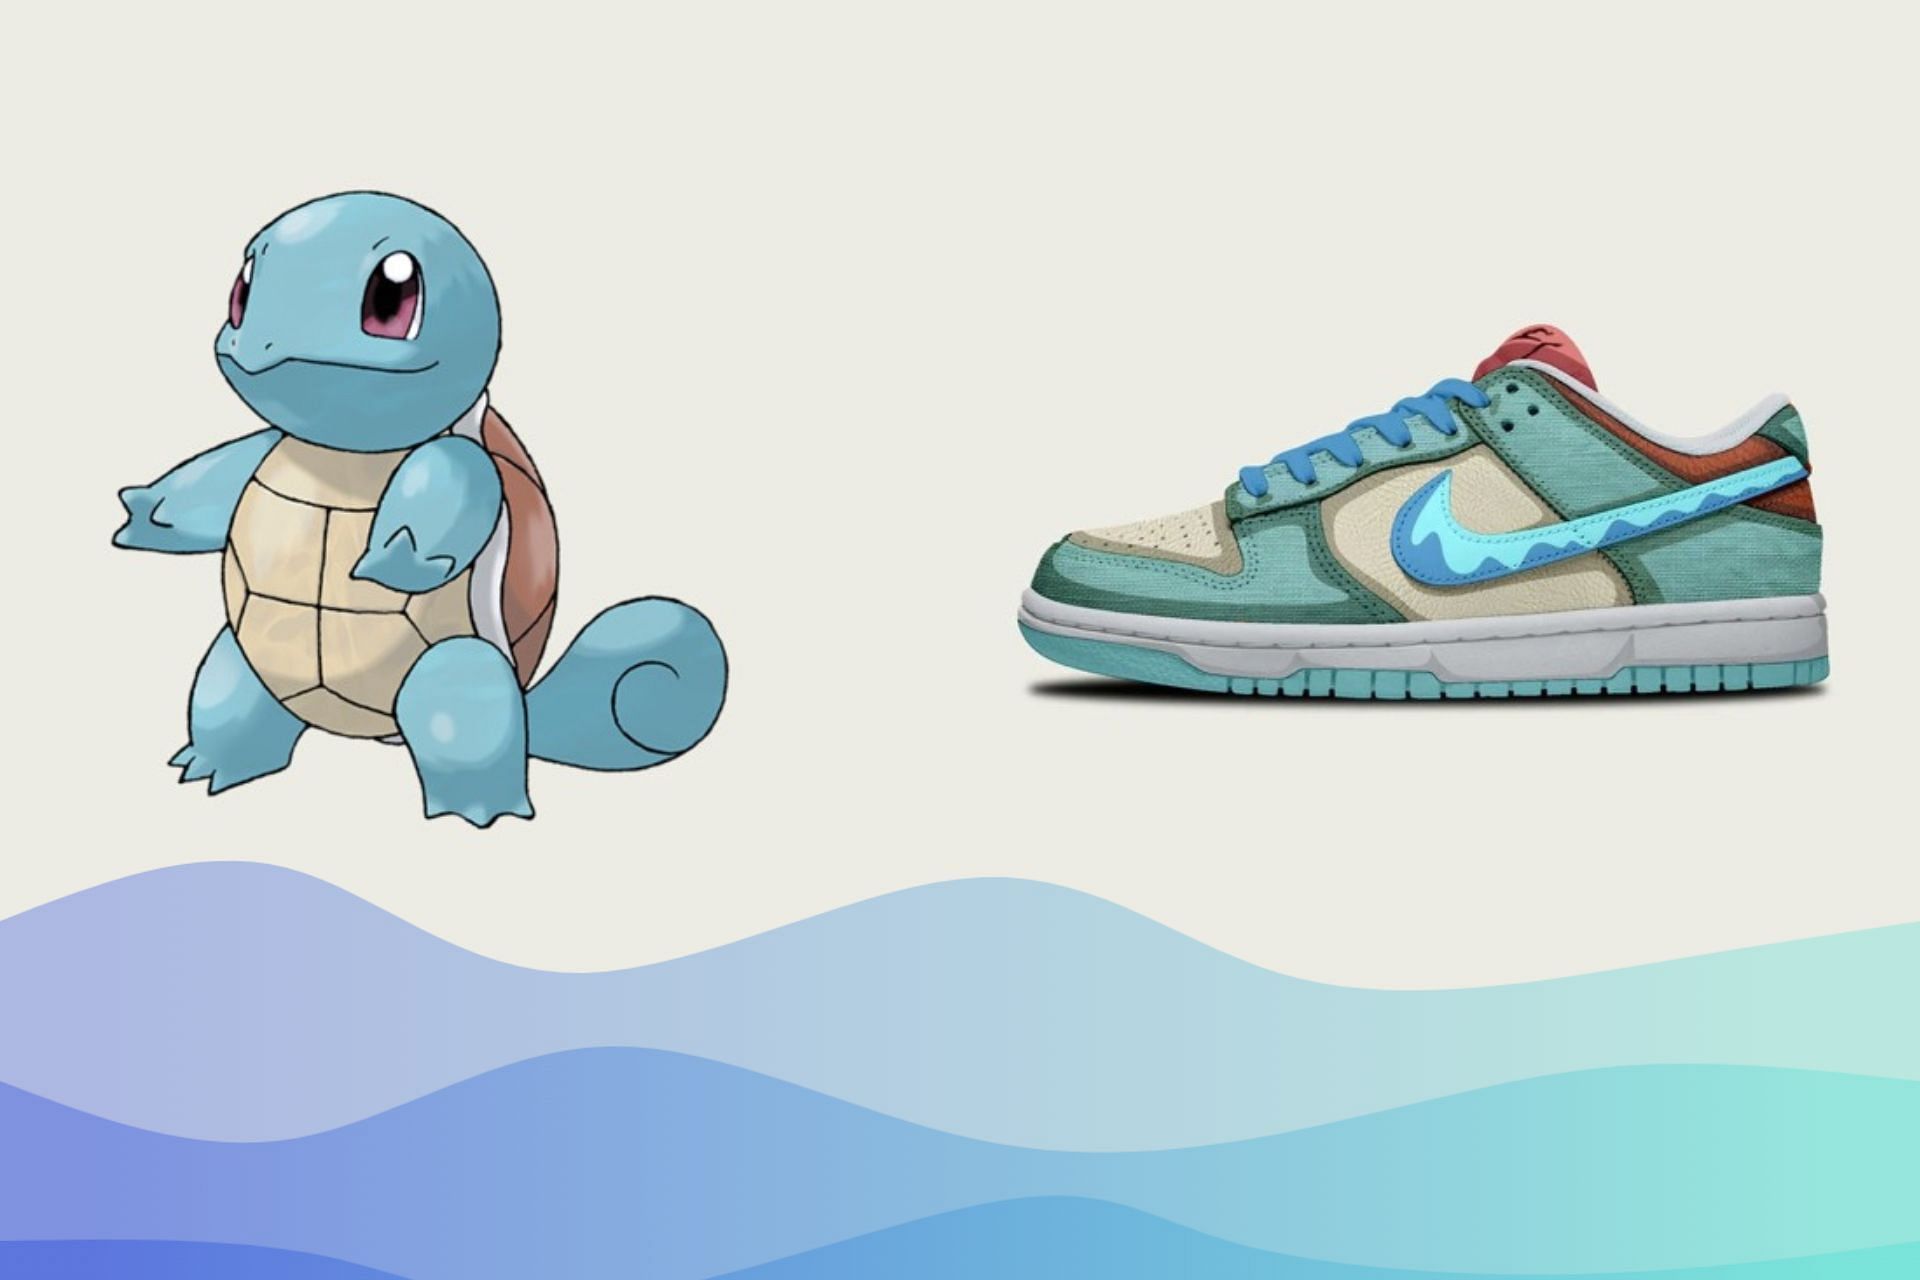 Where to buy Nike SB Dunk Low “Squirtle” shoes? Everything we know